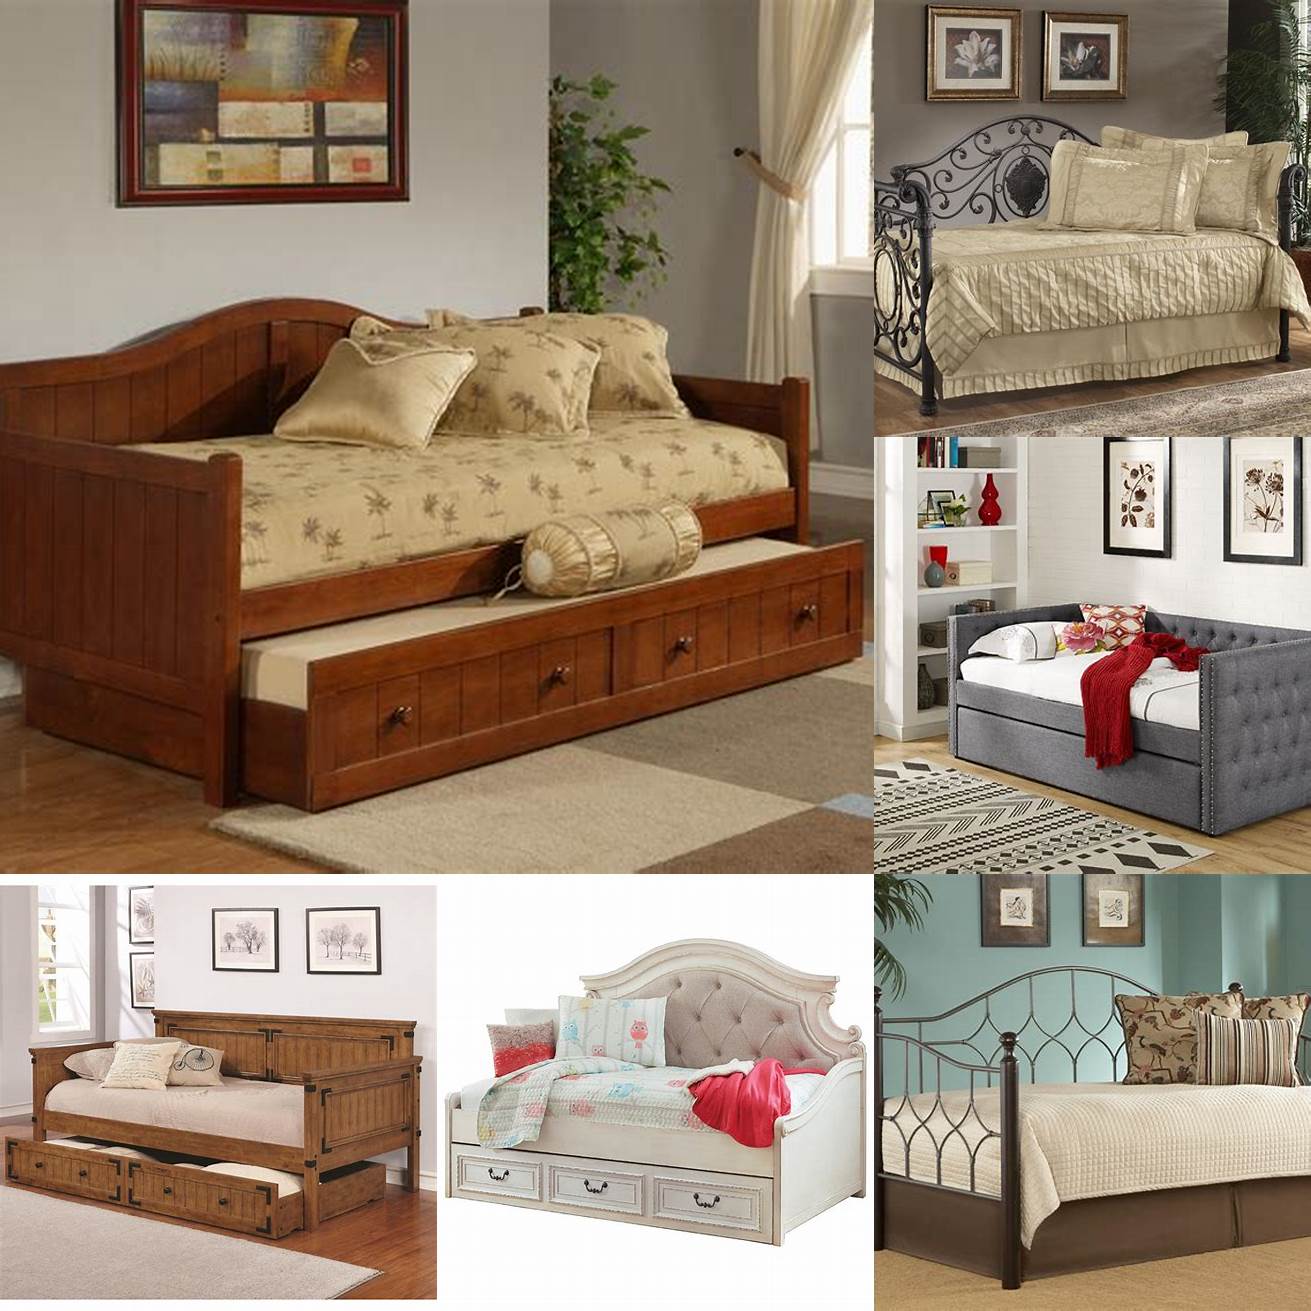 Beds and Daybeds